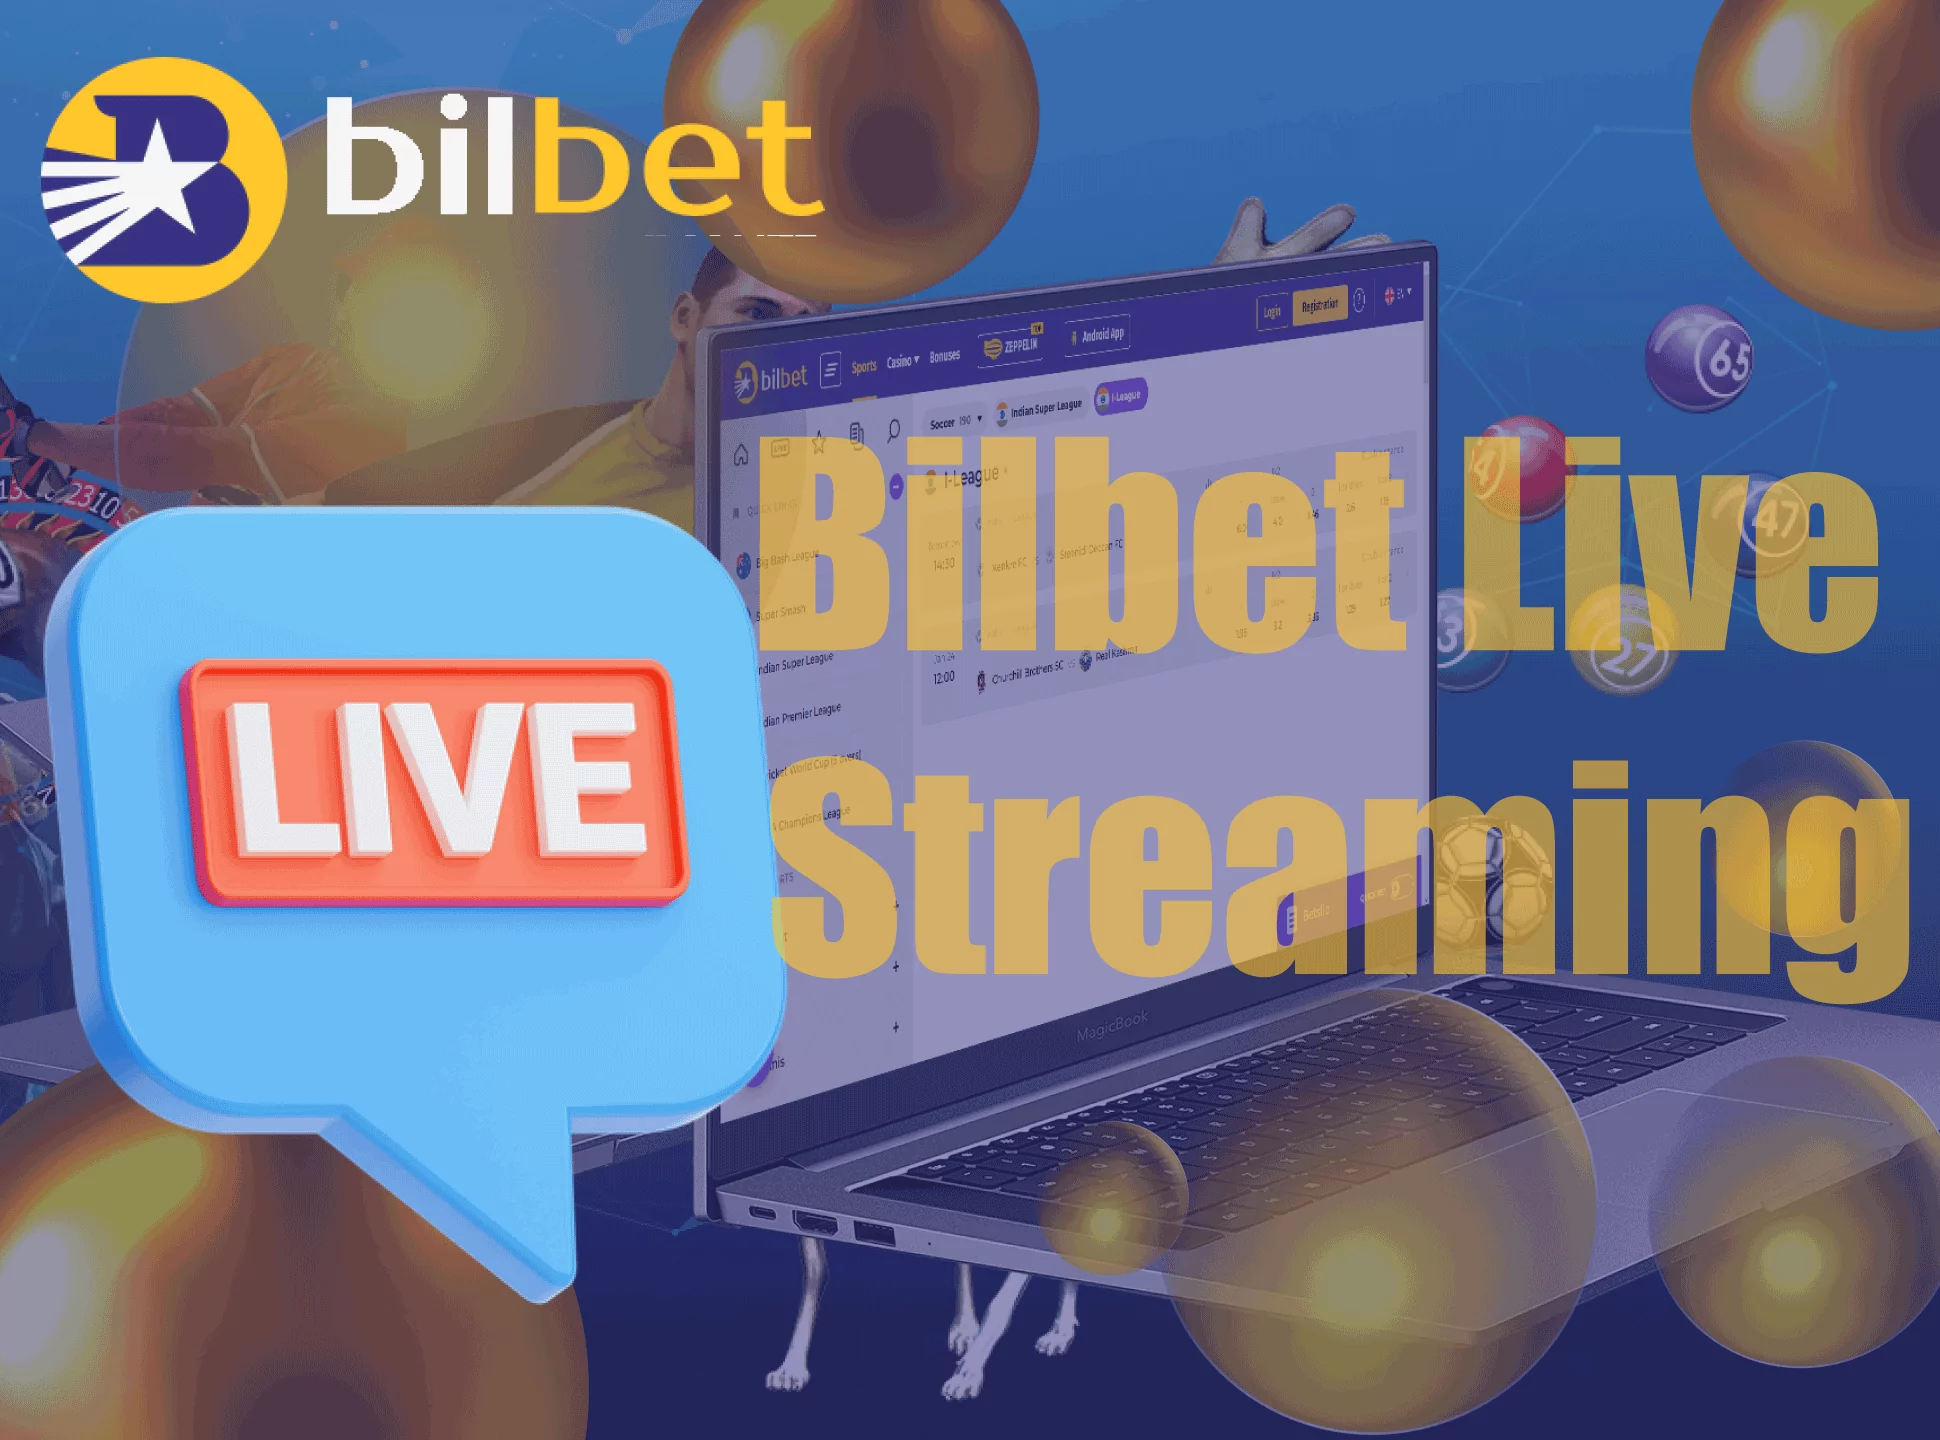 Watch the streamings of the events right on the Bilbet site and place live bets.